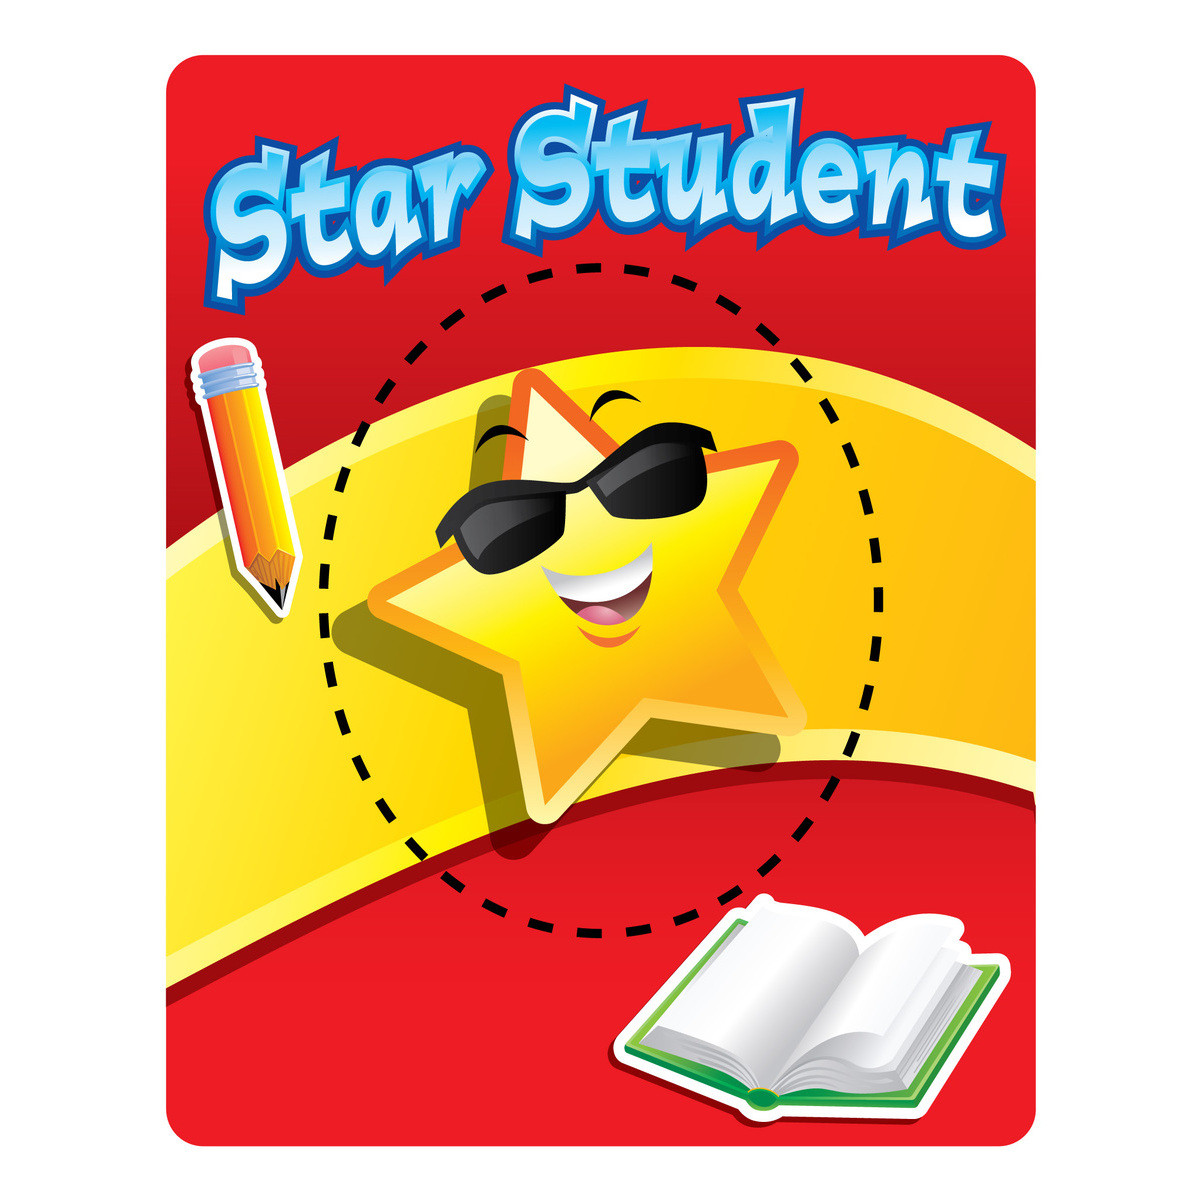 Picture Frame Magnet- Star Student